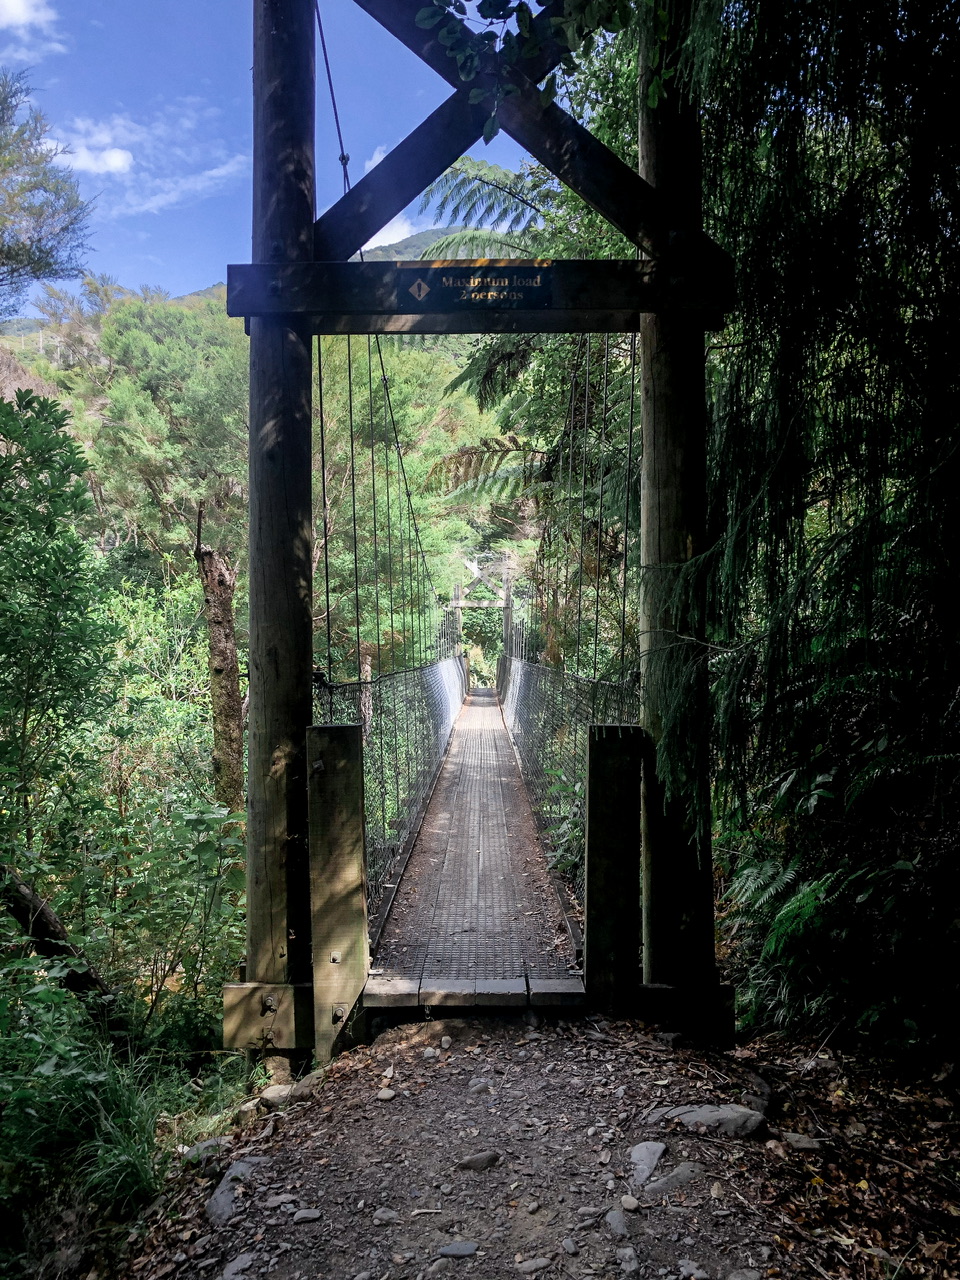 Single lane pedestrian bridge formed of wooden boards, wire netting, cables and wooden posts through native New Zealand bush